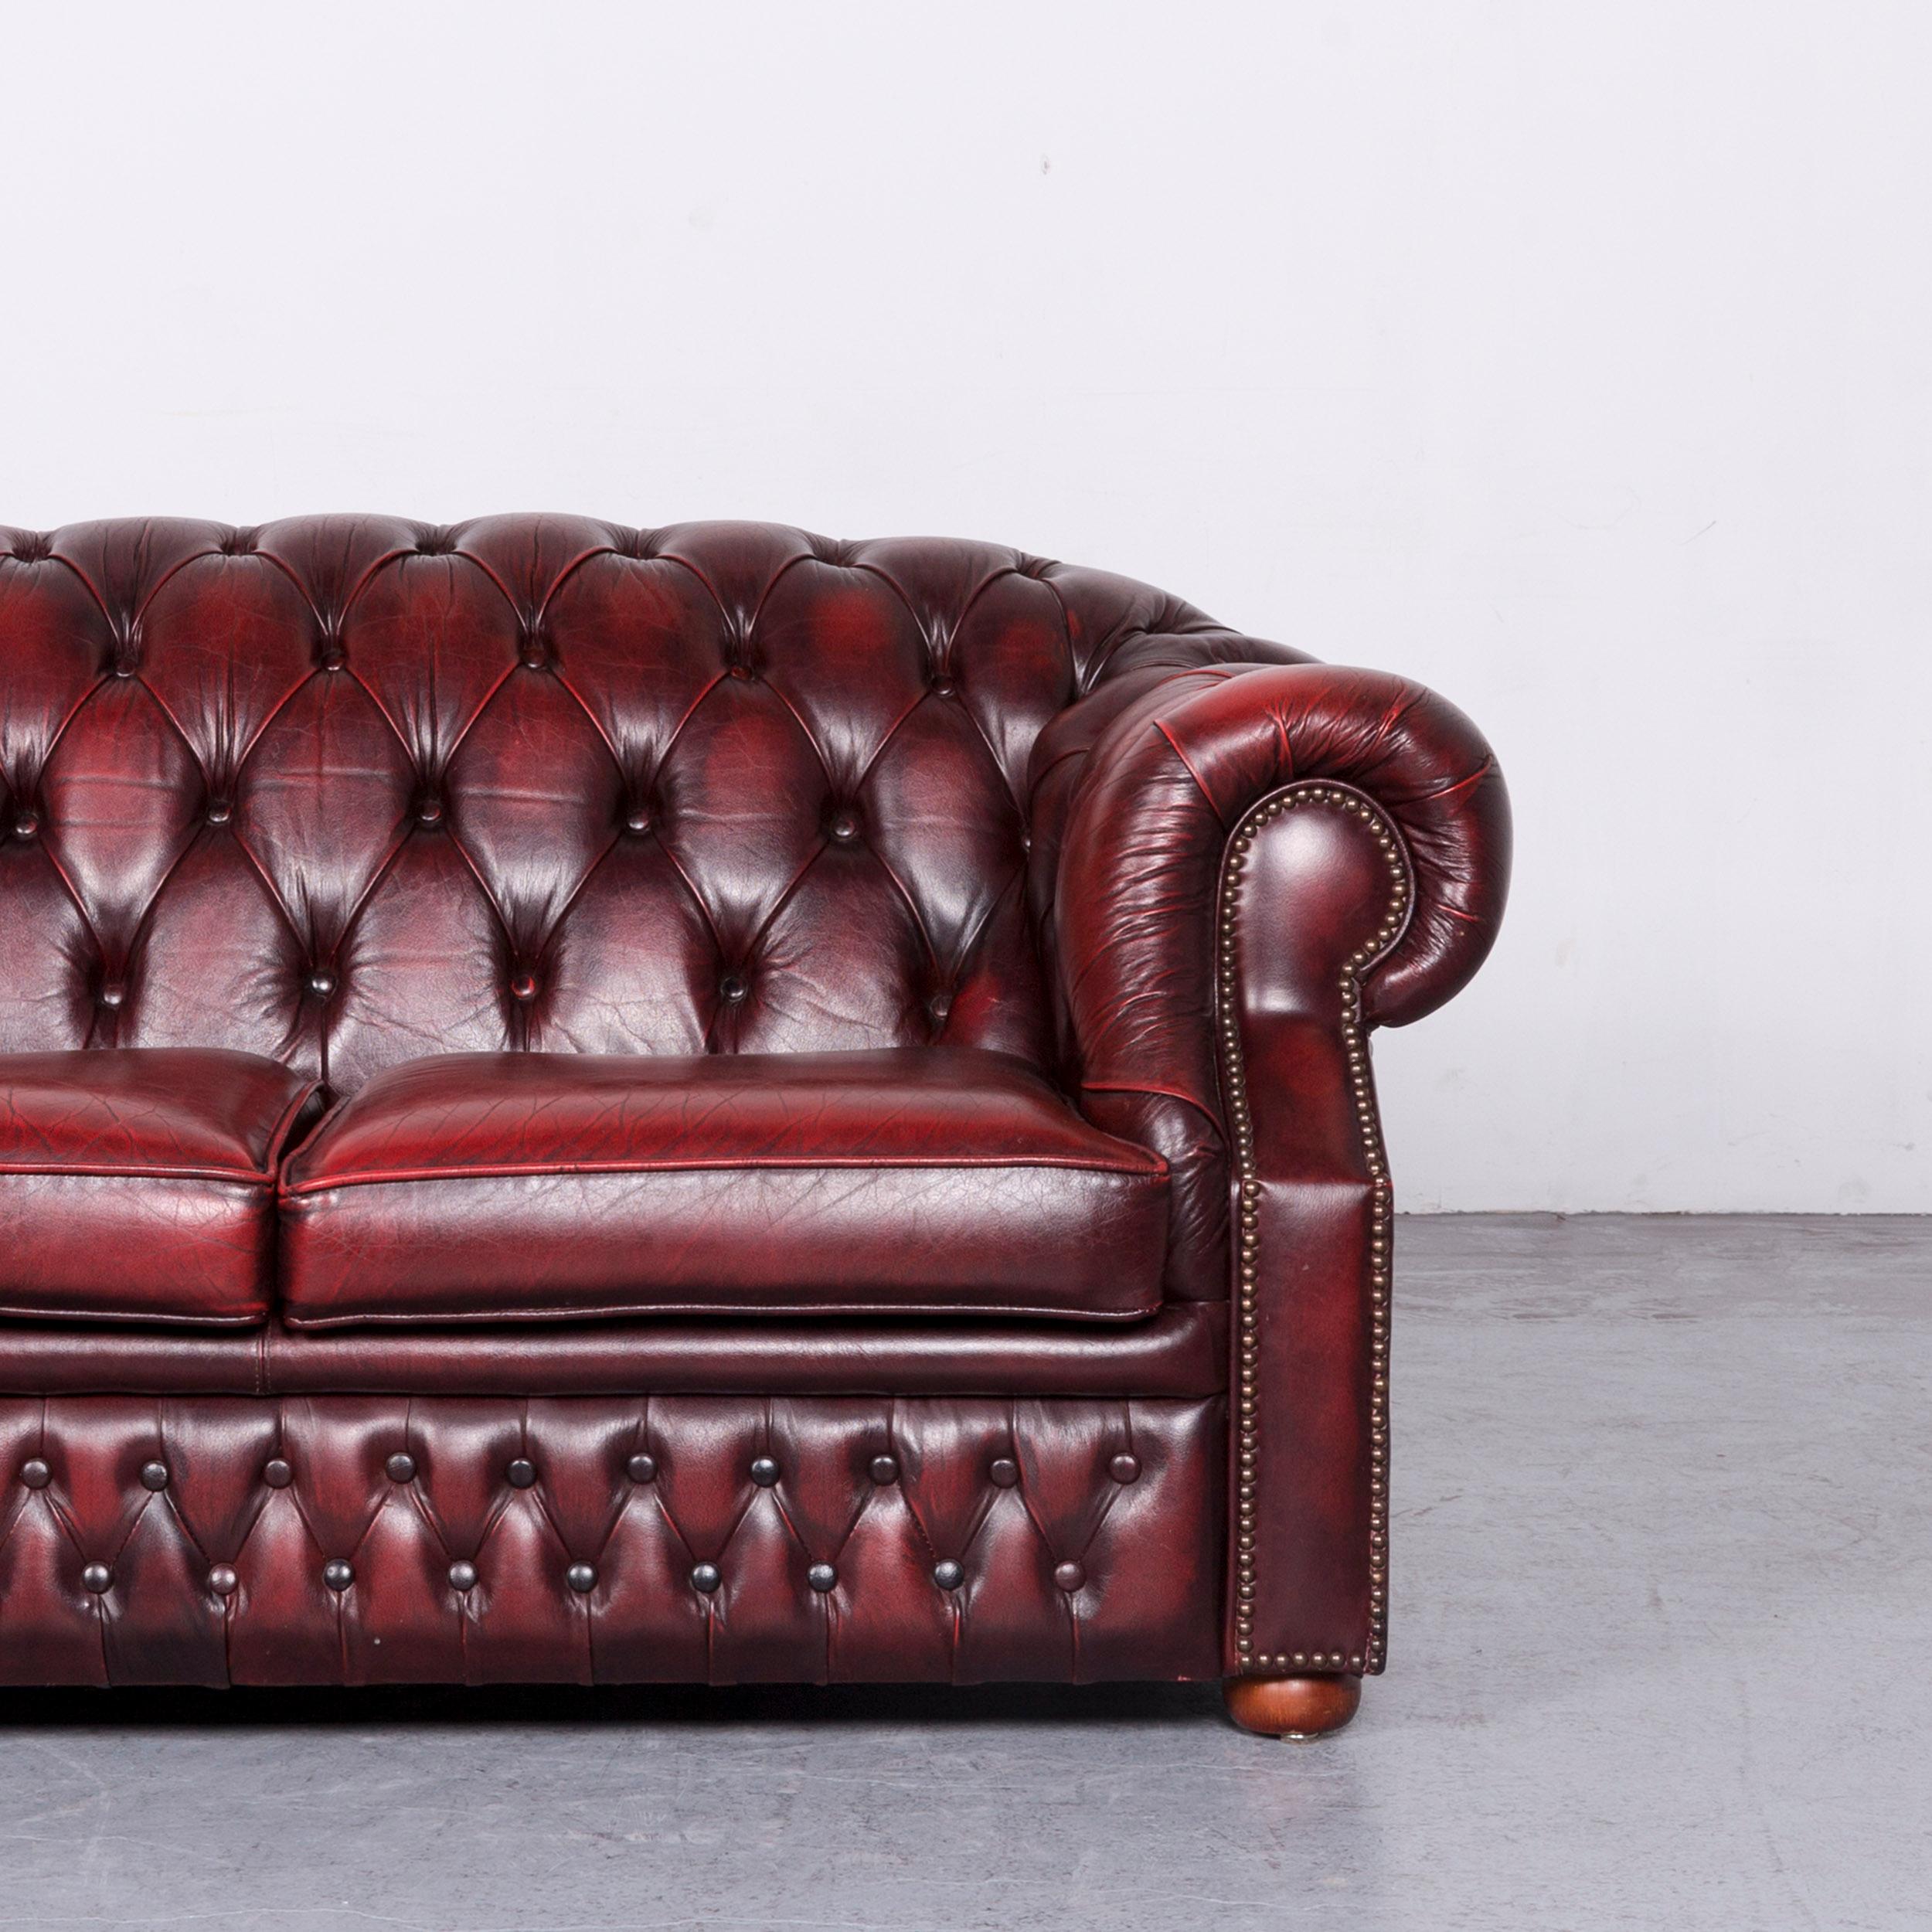 British Chesterfield Centurion Leather Sofa Armchair Set Red Two-Seat Vintage Couch